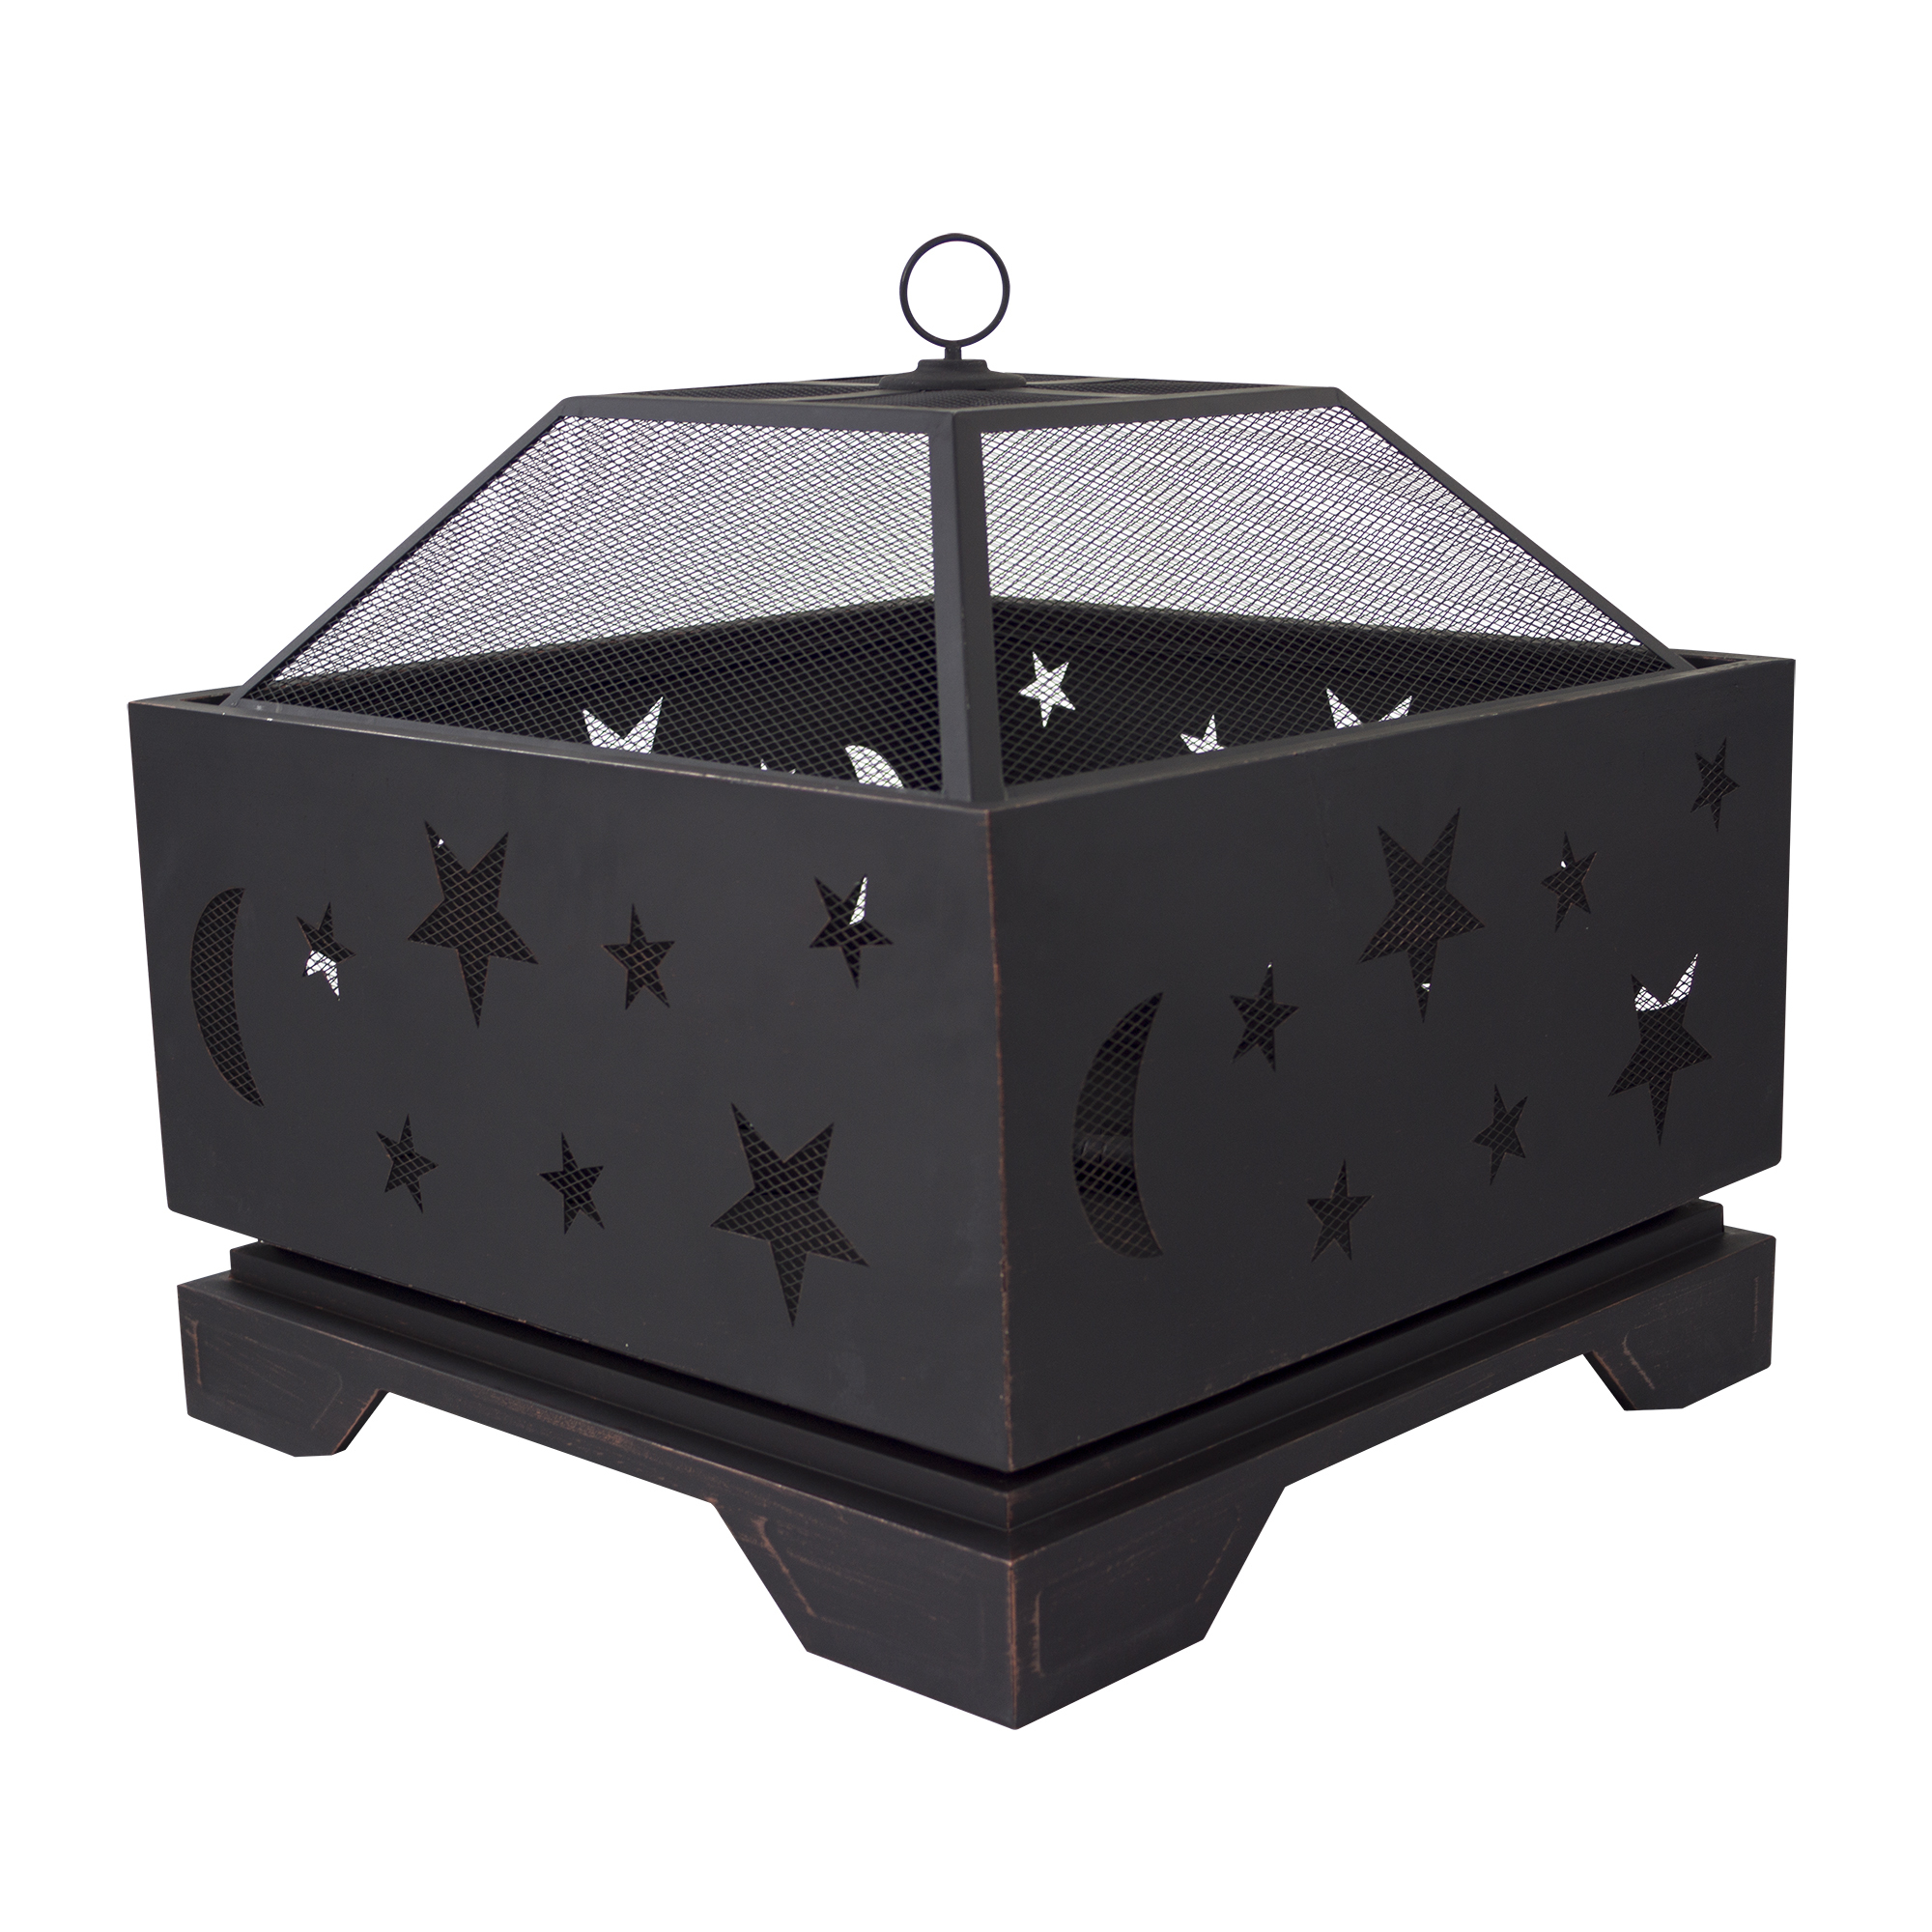 Pleasant Hearth, Stargazer Square Fire Pit, Fuel Type Wood, Material Carbon Steel, Model OFW314S